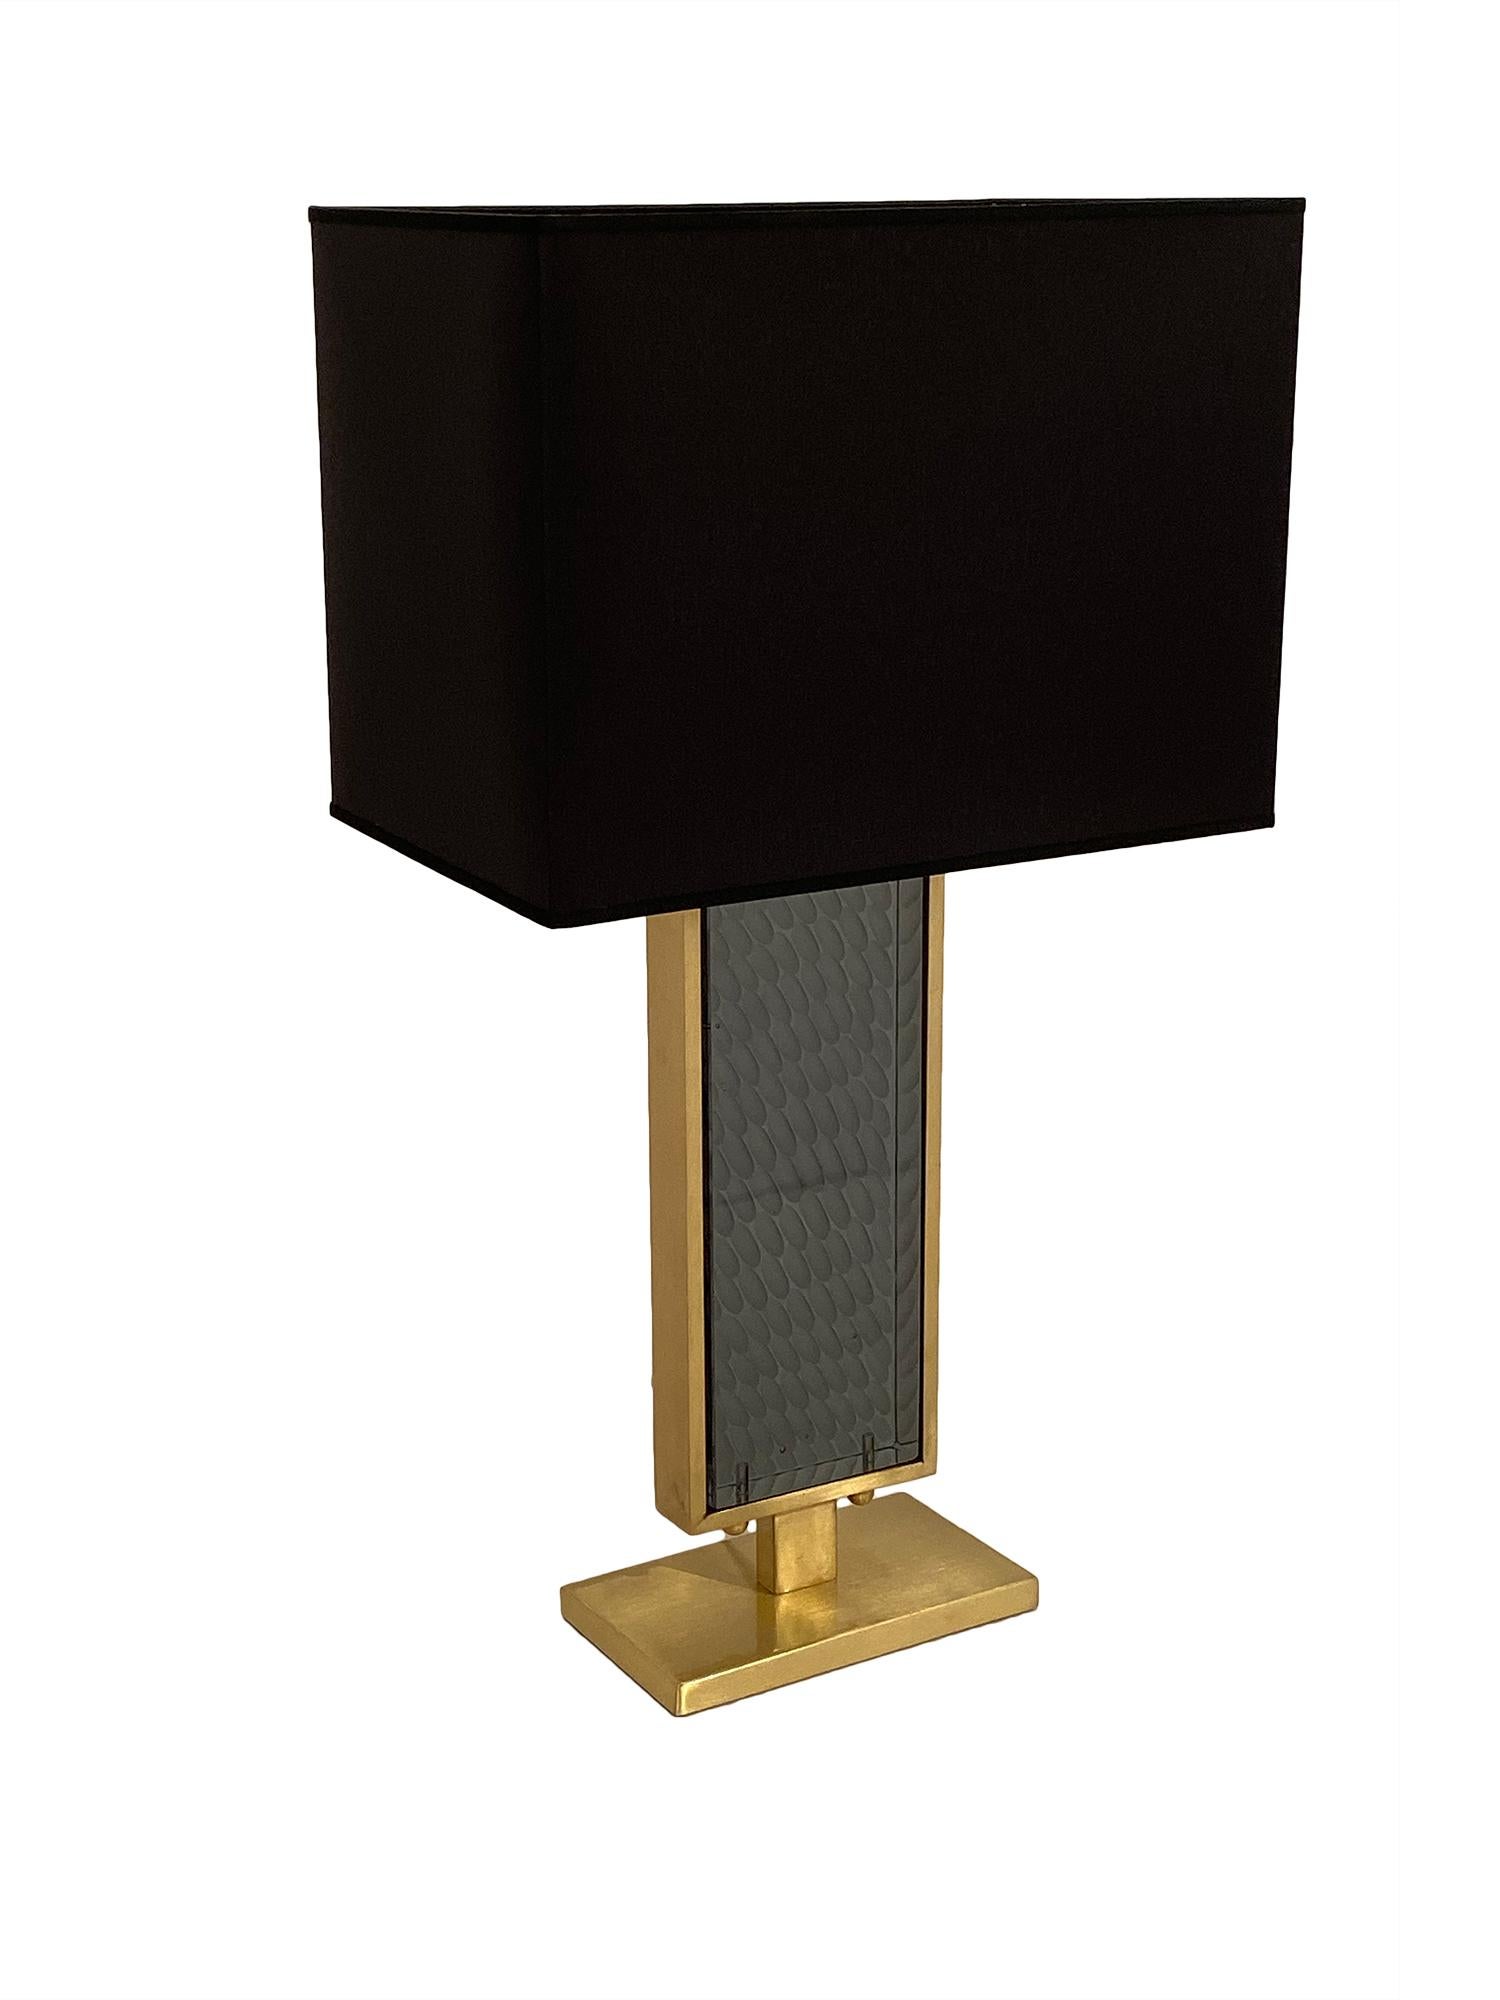 Murano glass in a gray hue and solid brass make these beautiful table lamps so stunning. With rectangular bases, the opaque gray colored glass is surrounded by brass, and light is able to pass through the glass in remarkable ways. The glass is